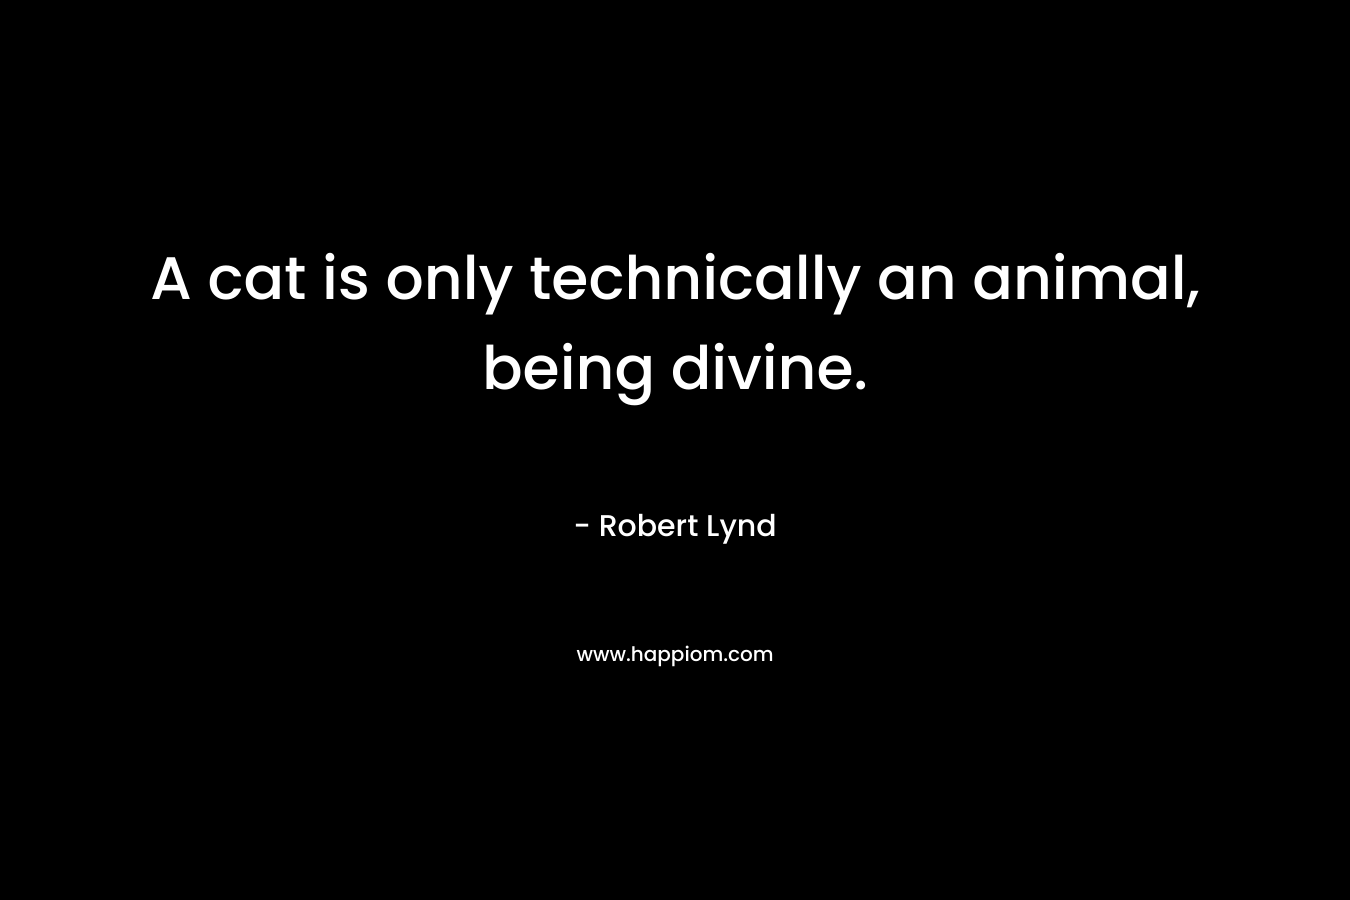 A cat is only technically an animal, being divine. – Robert Lynd